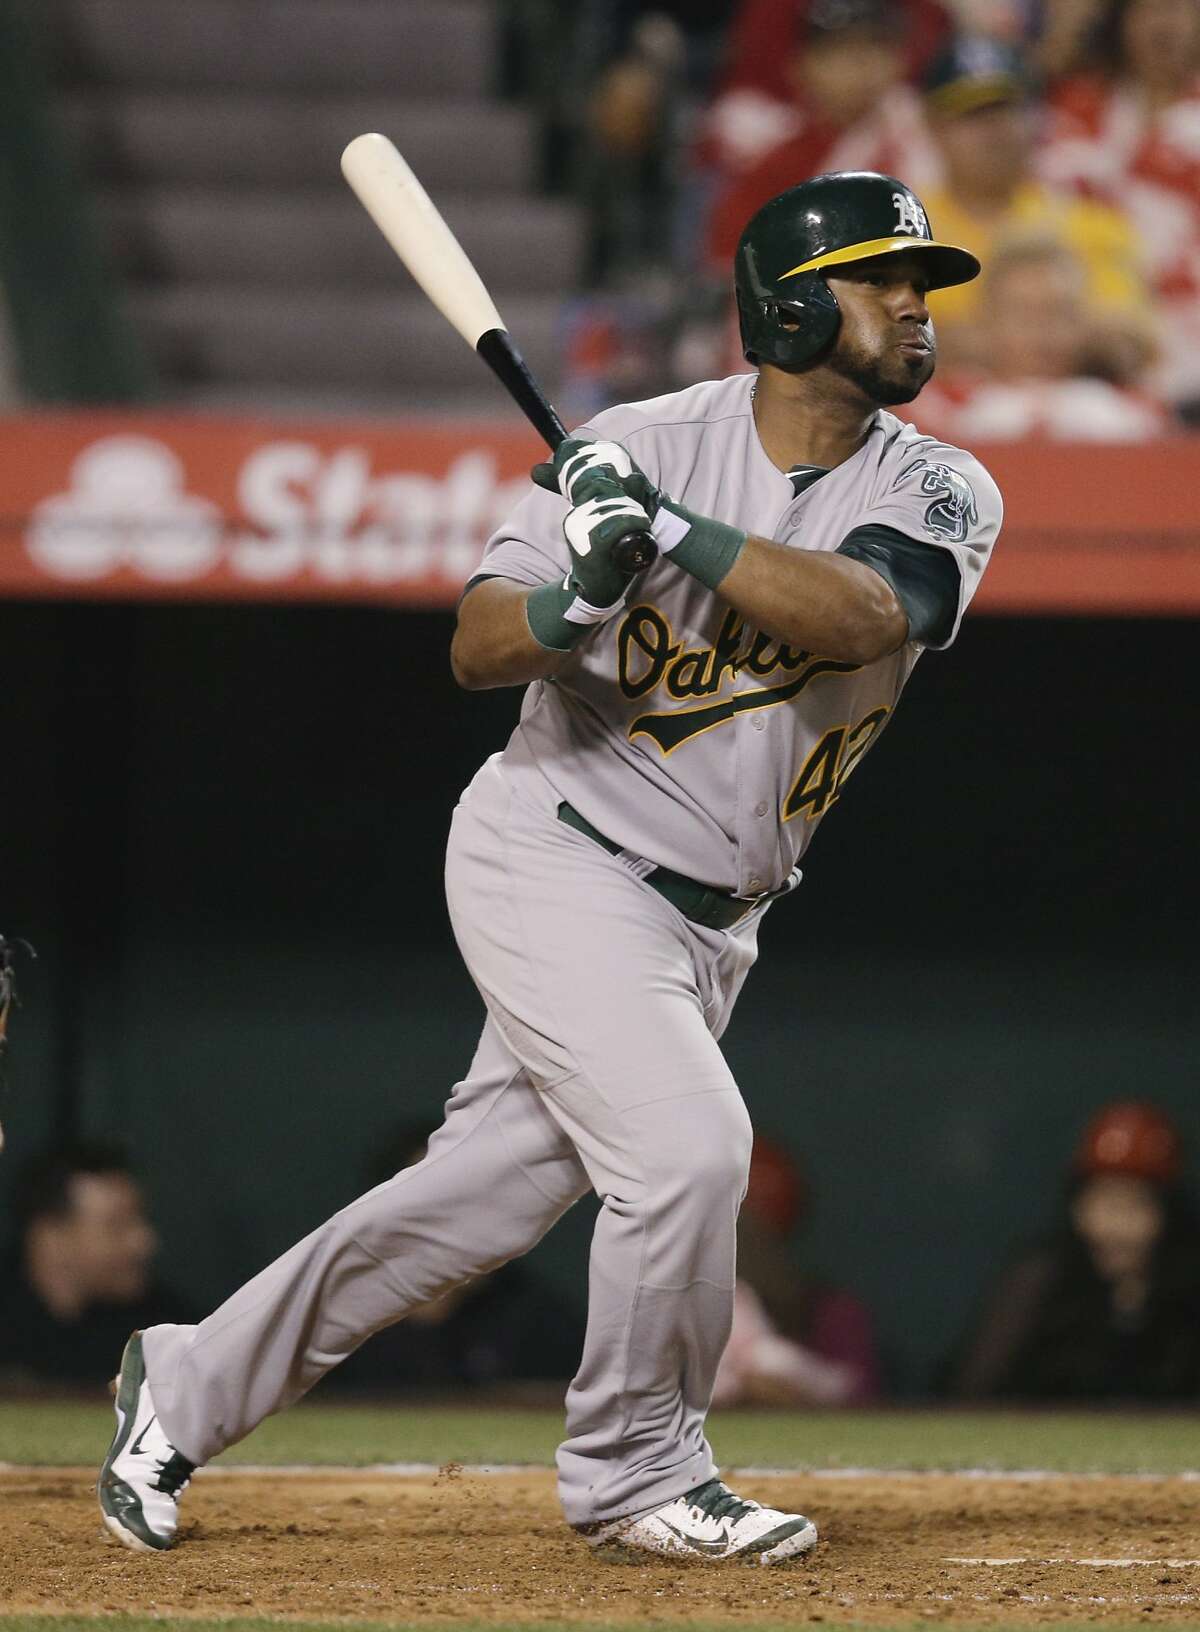 Oakland Athletics' Alberto Callaspo hits a RBI single during the eighth inning of a baseball game against the Los Angeles Angels on Tuesday, April 15, 2014, in Anaheim, Calif. (AP Photo/Jae C. Hong)